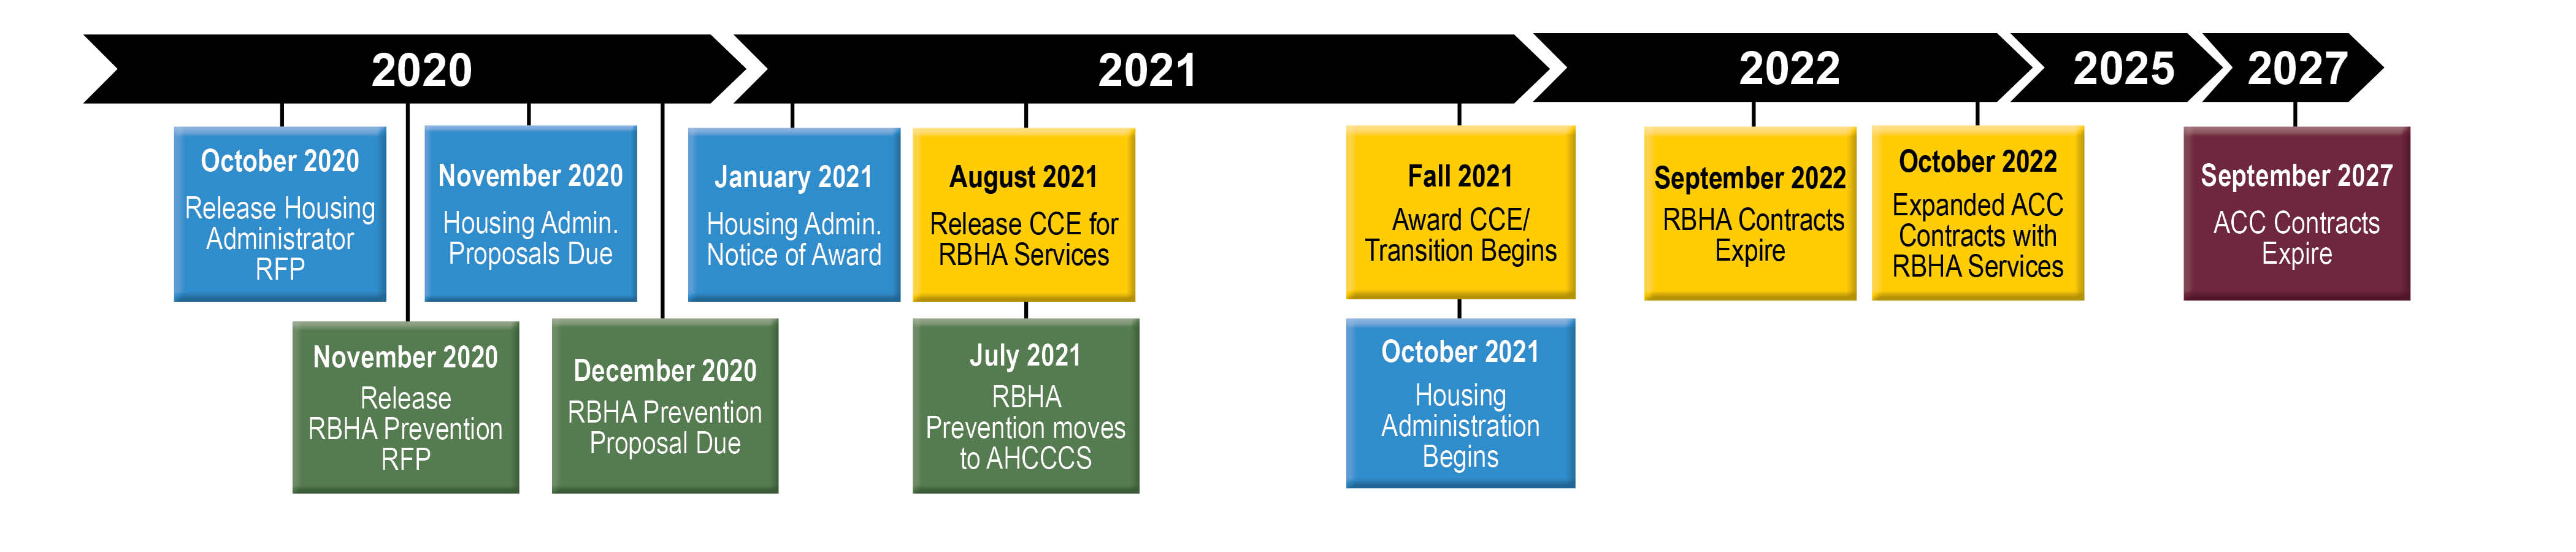 Anticipated Timeline for Request for Proposal Activities graphic